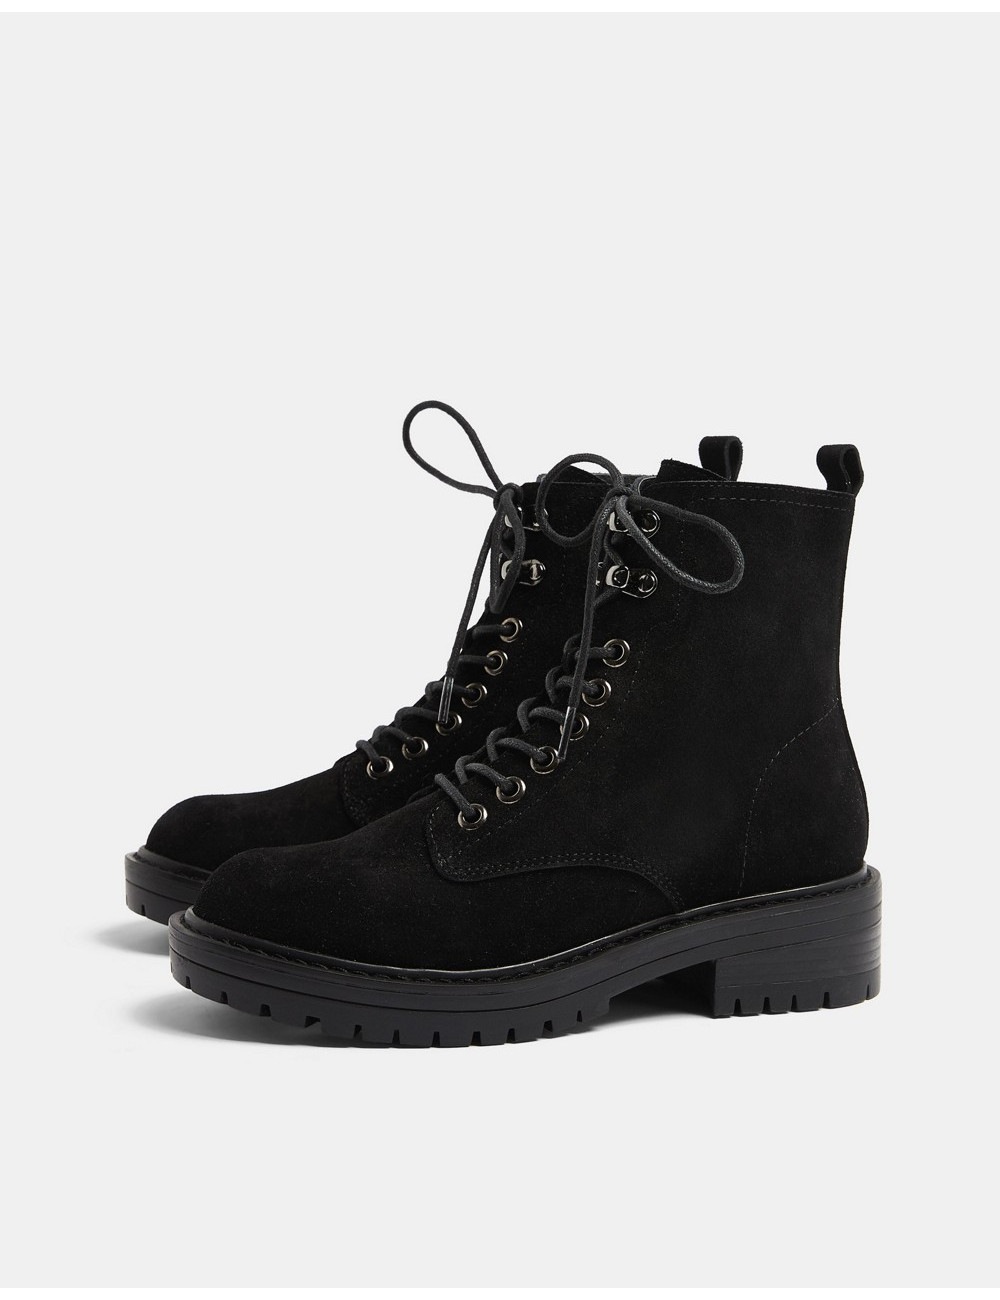 Topshop suede lace up boots...